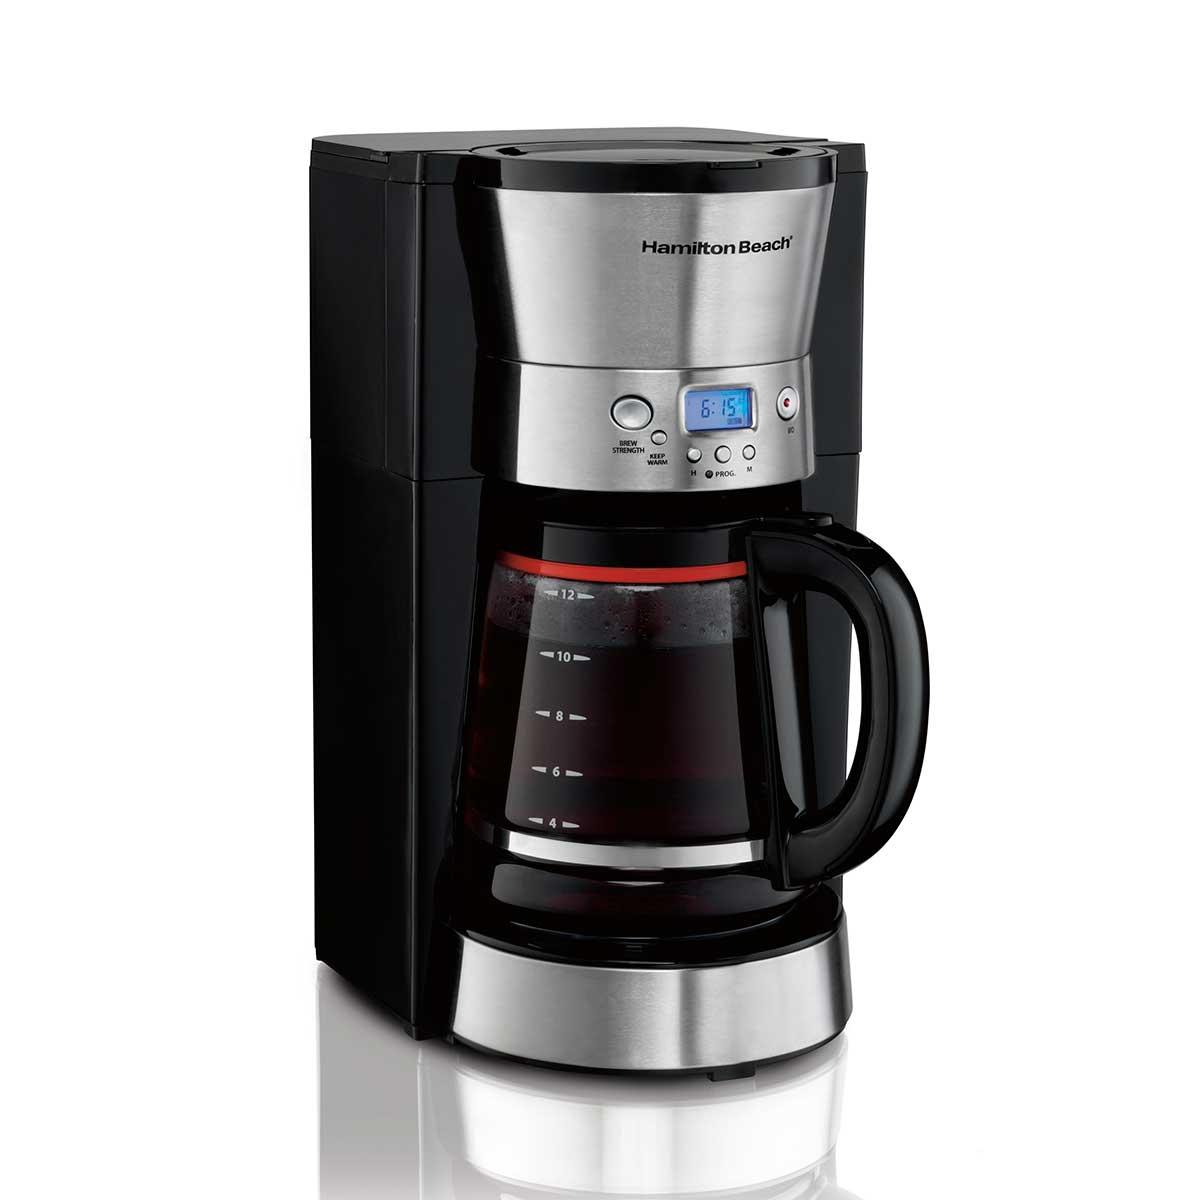 12 Cup Programmable Coffee Maker with Cone Filter, Black & Stainless (46895)